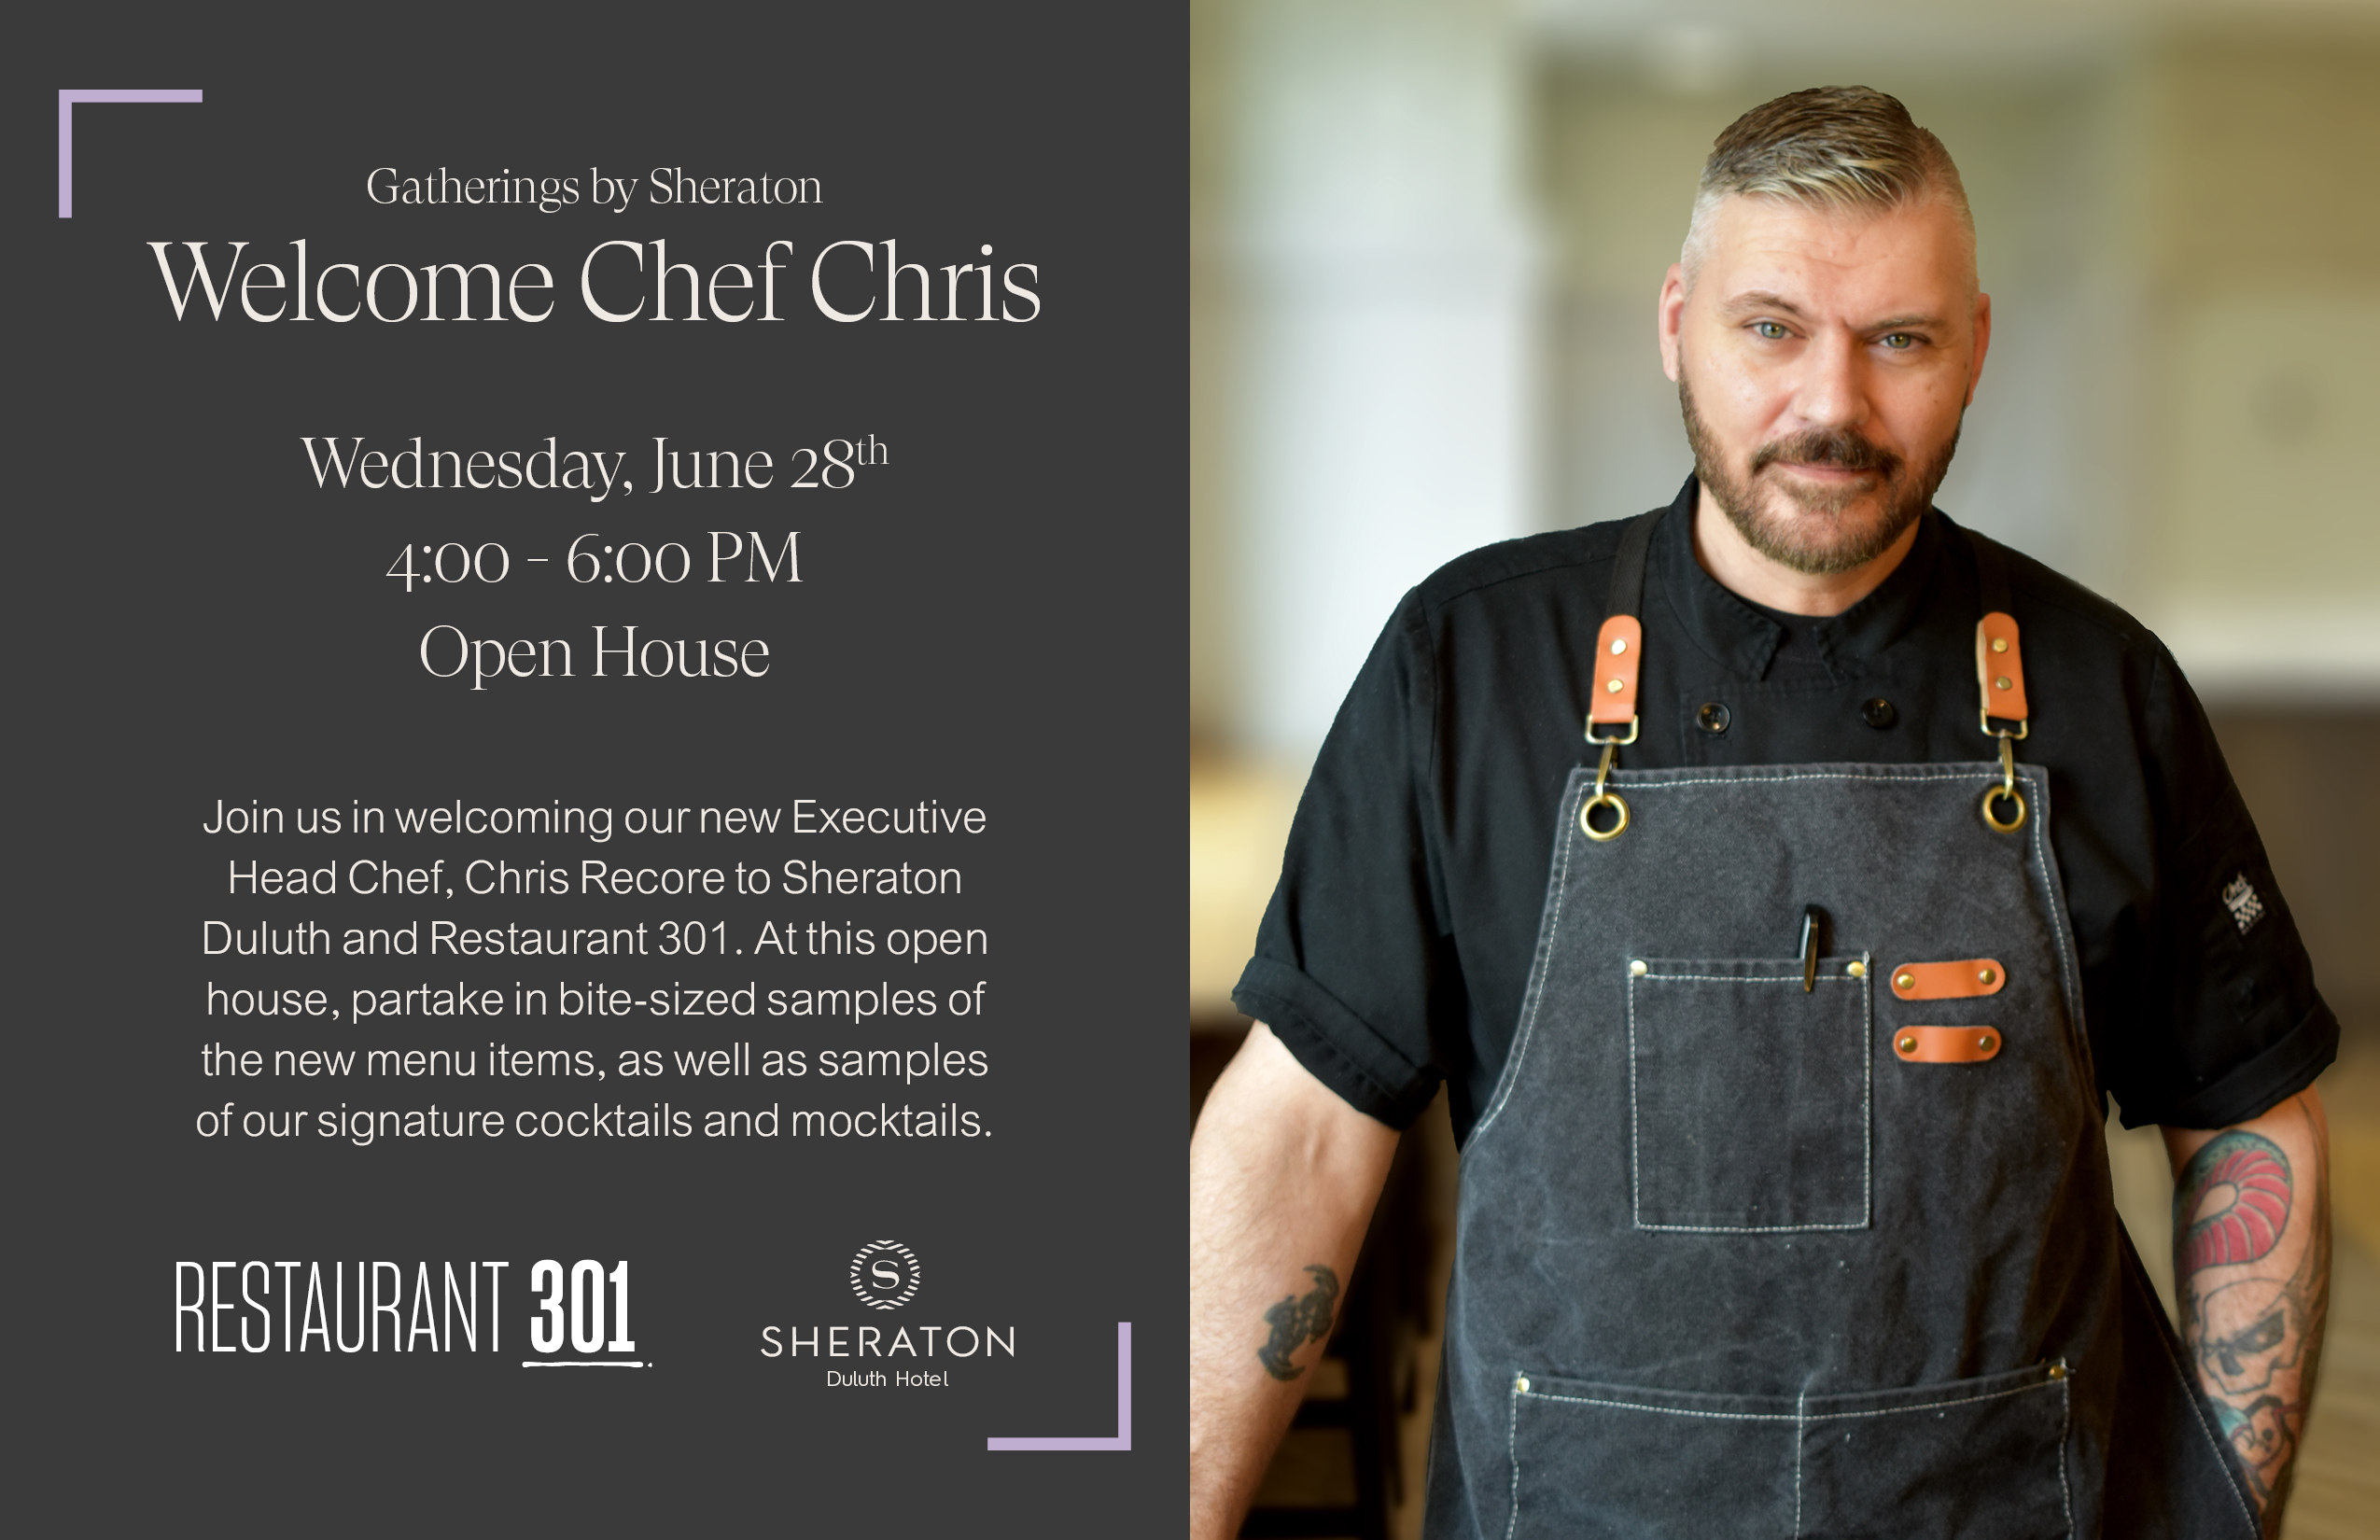 Gatherings by Sheraton - Welcome Chef Chris